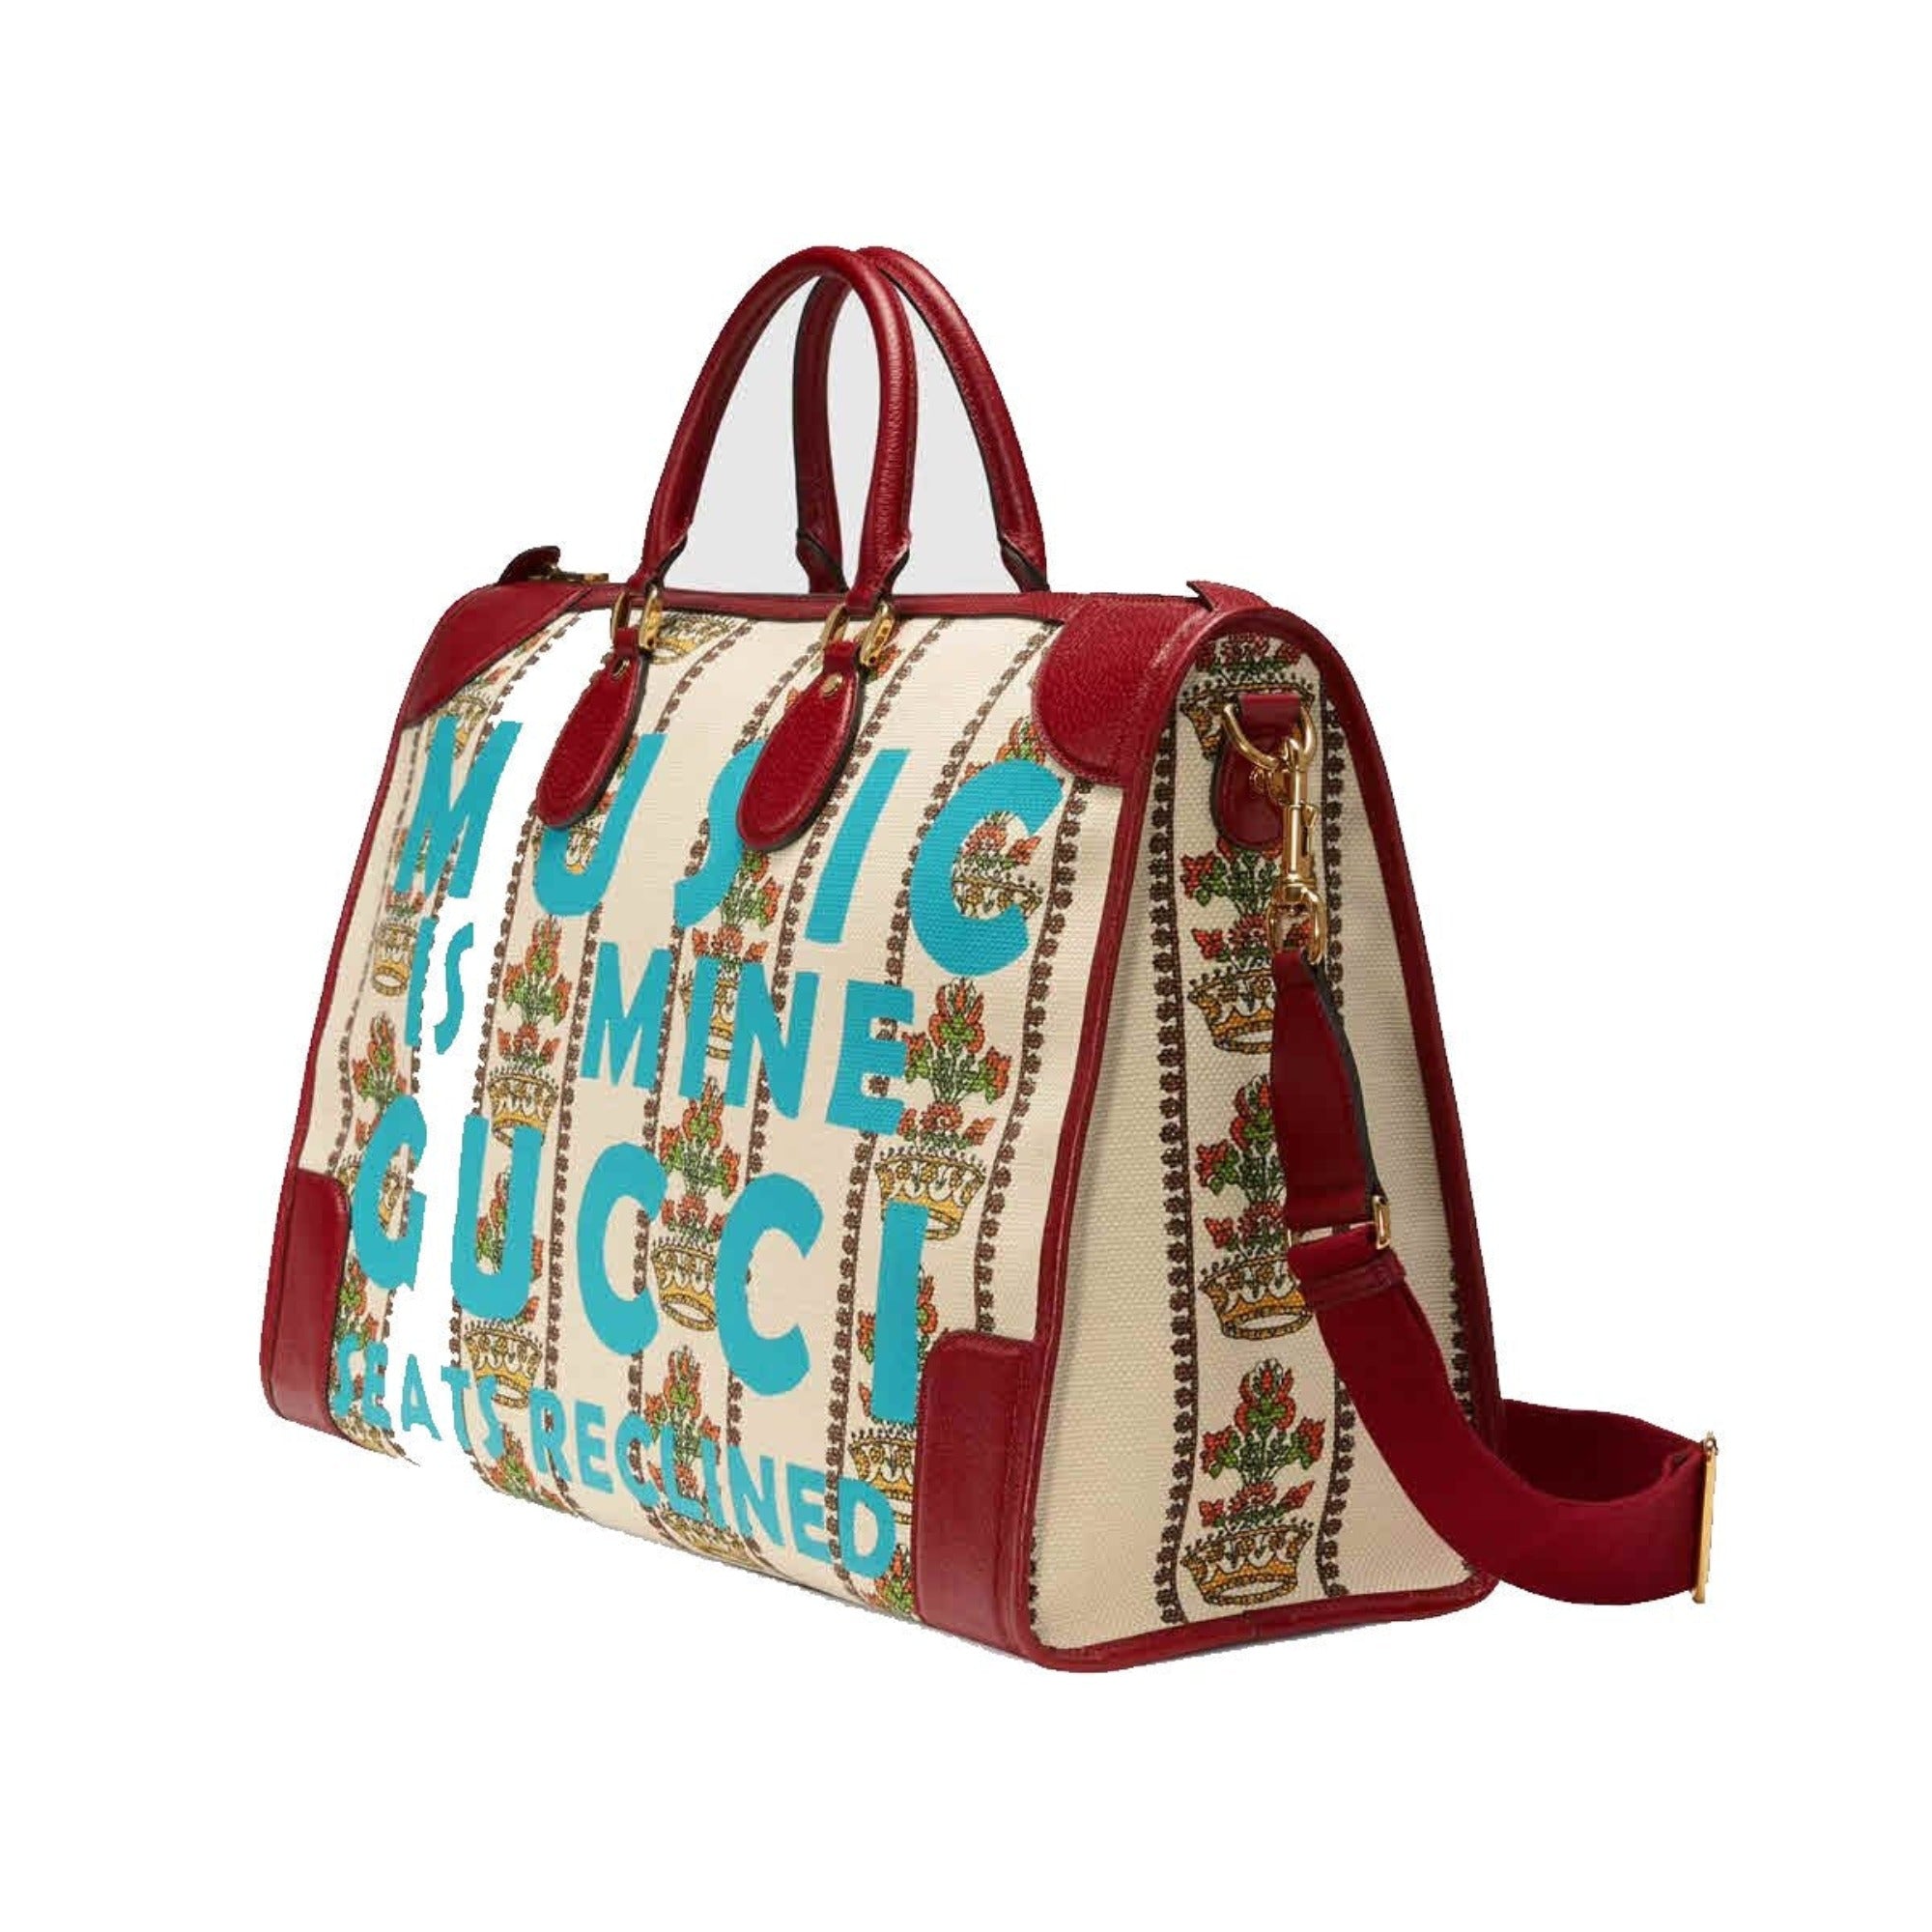 Gucci Centennial Music Is Mine Jacquard Leather Duffel Bag 676533 at_Queen_Bee_of_Beverly_Hills